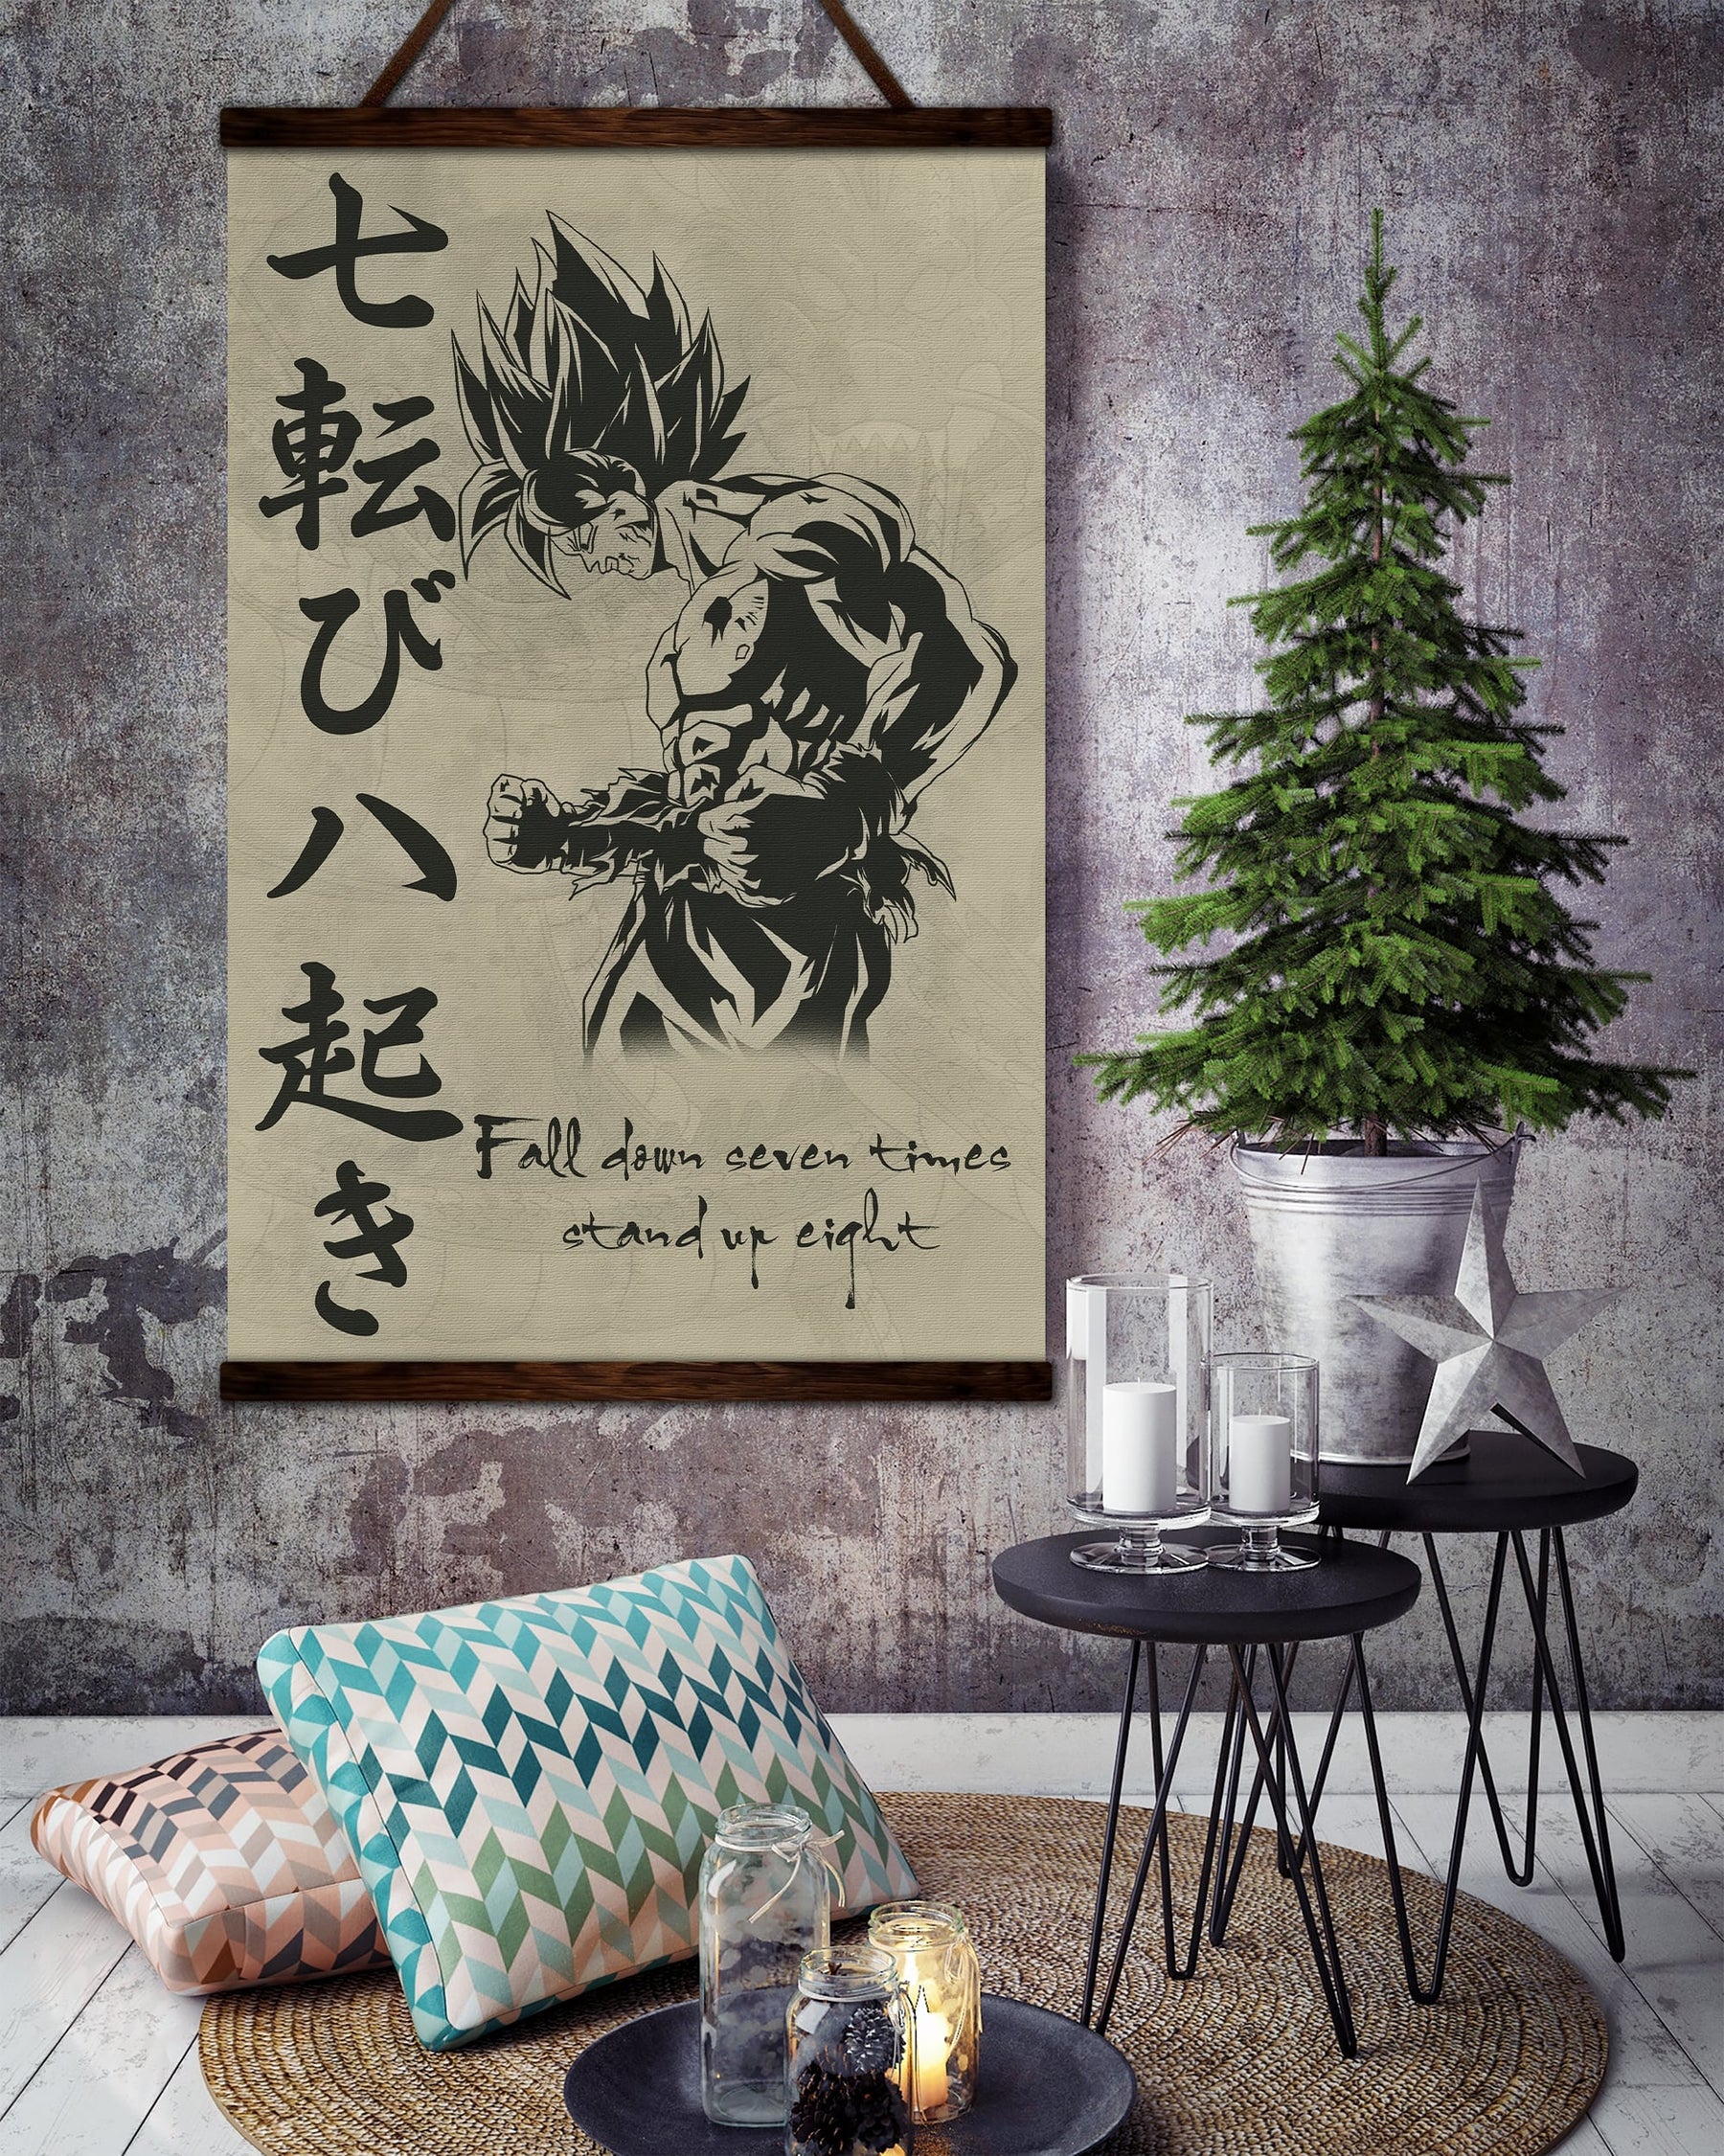 DR013 - Fall Down Seven Times Stand Up Eight - Goku - Vertical Poster - Vertical Canvas - Dragon Ball Poster